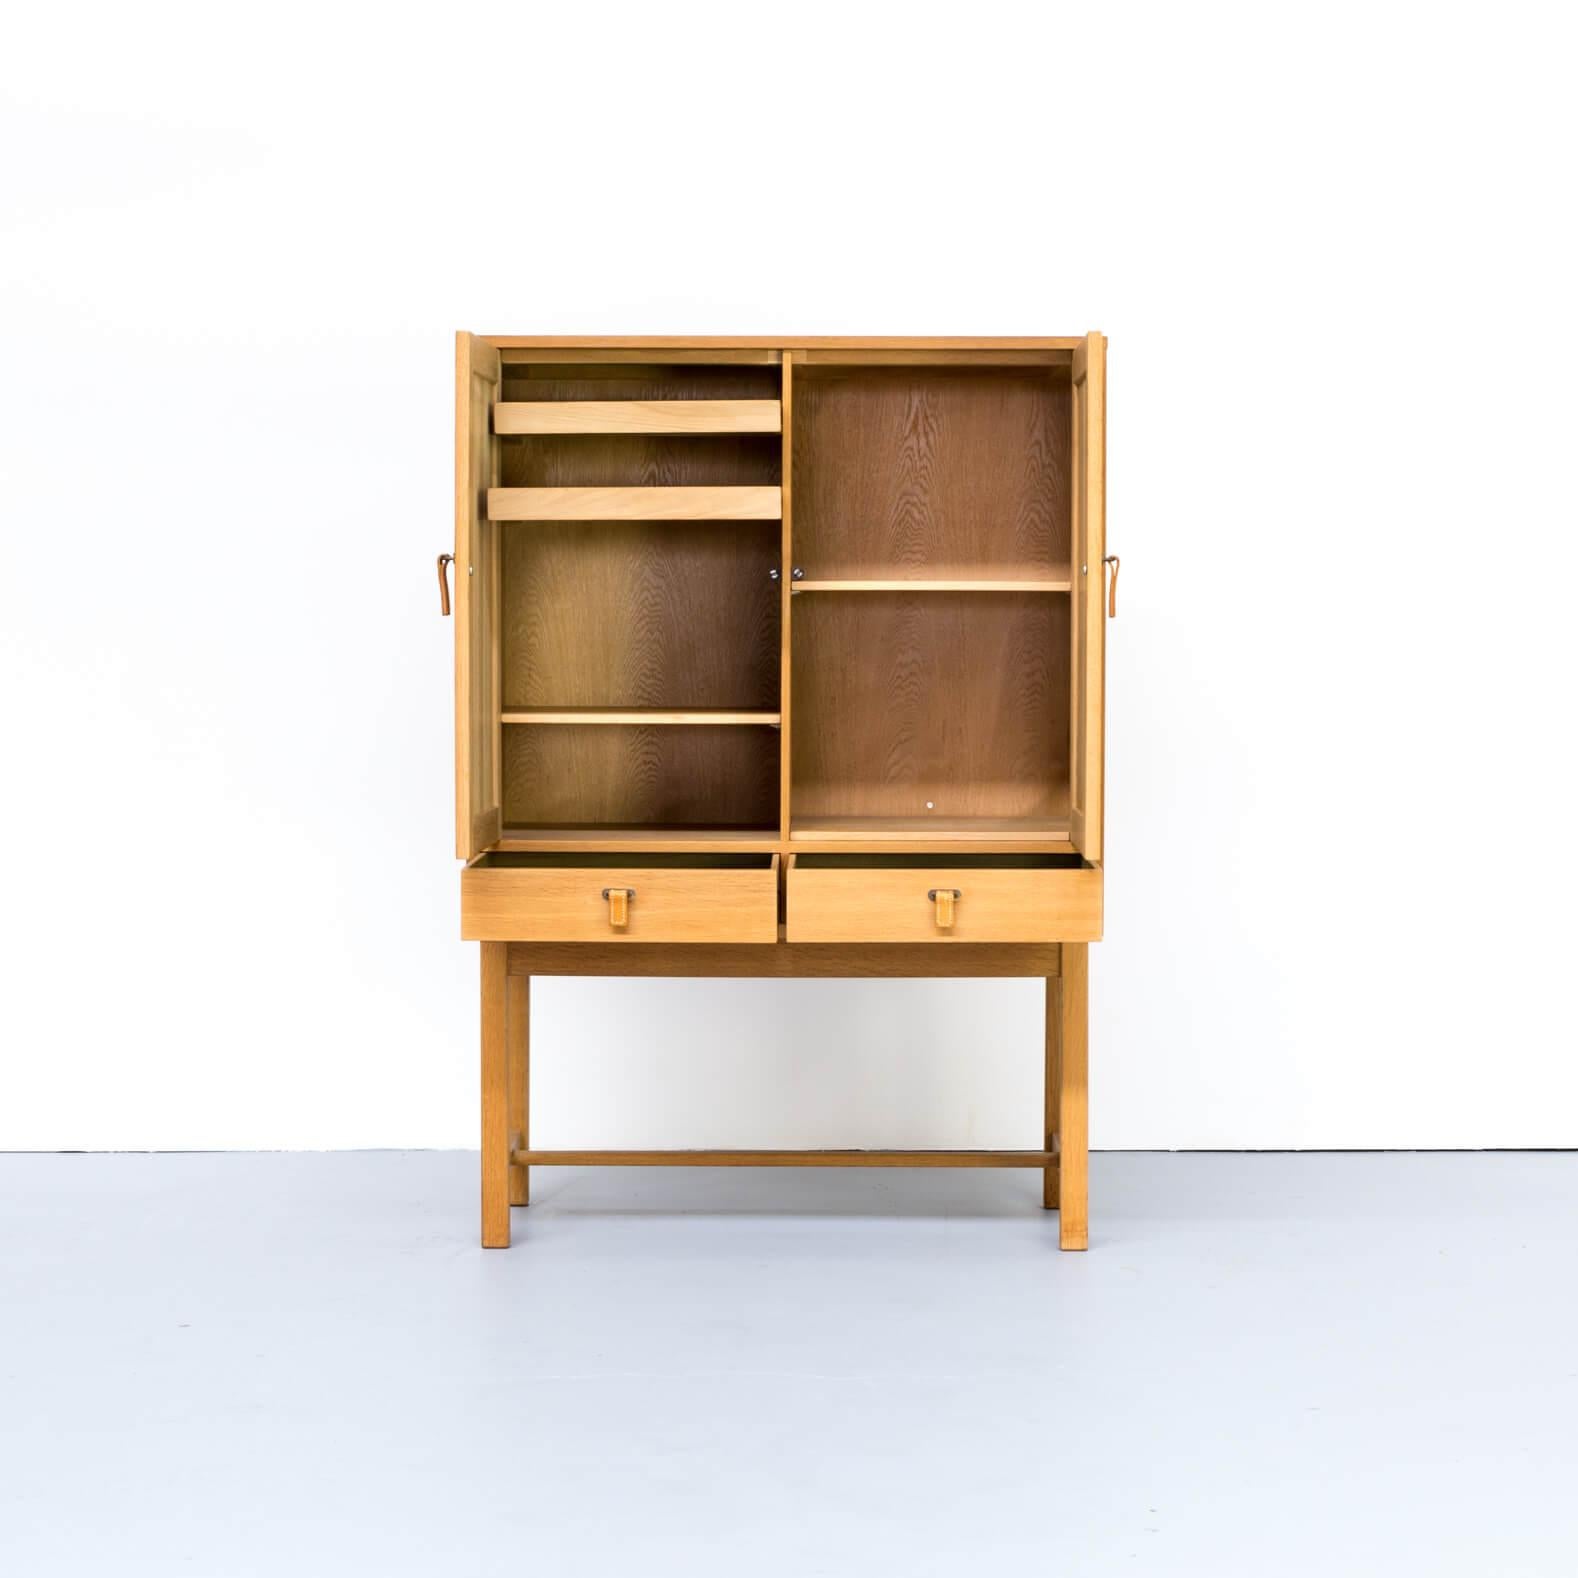 This beautiful esthetic two-door cabinet is made in oak and marked for KP Moller and shows Østervig’s designing skills to be his time ahead with the leather grip and beautiful lining design.